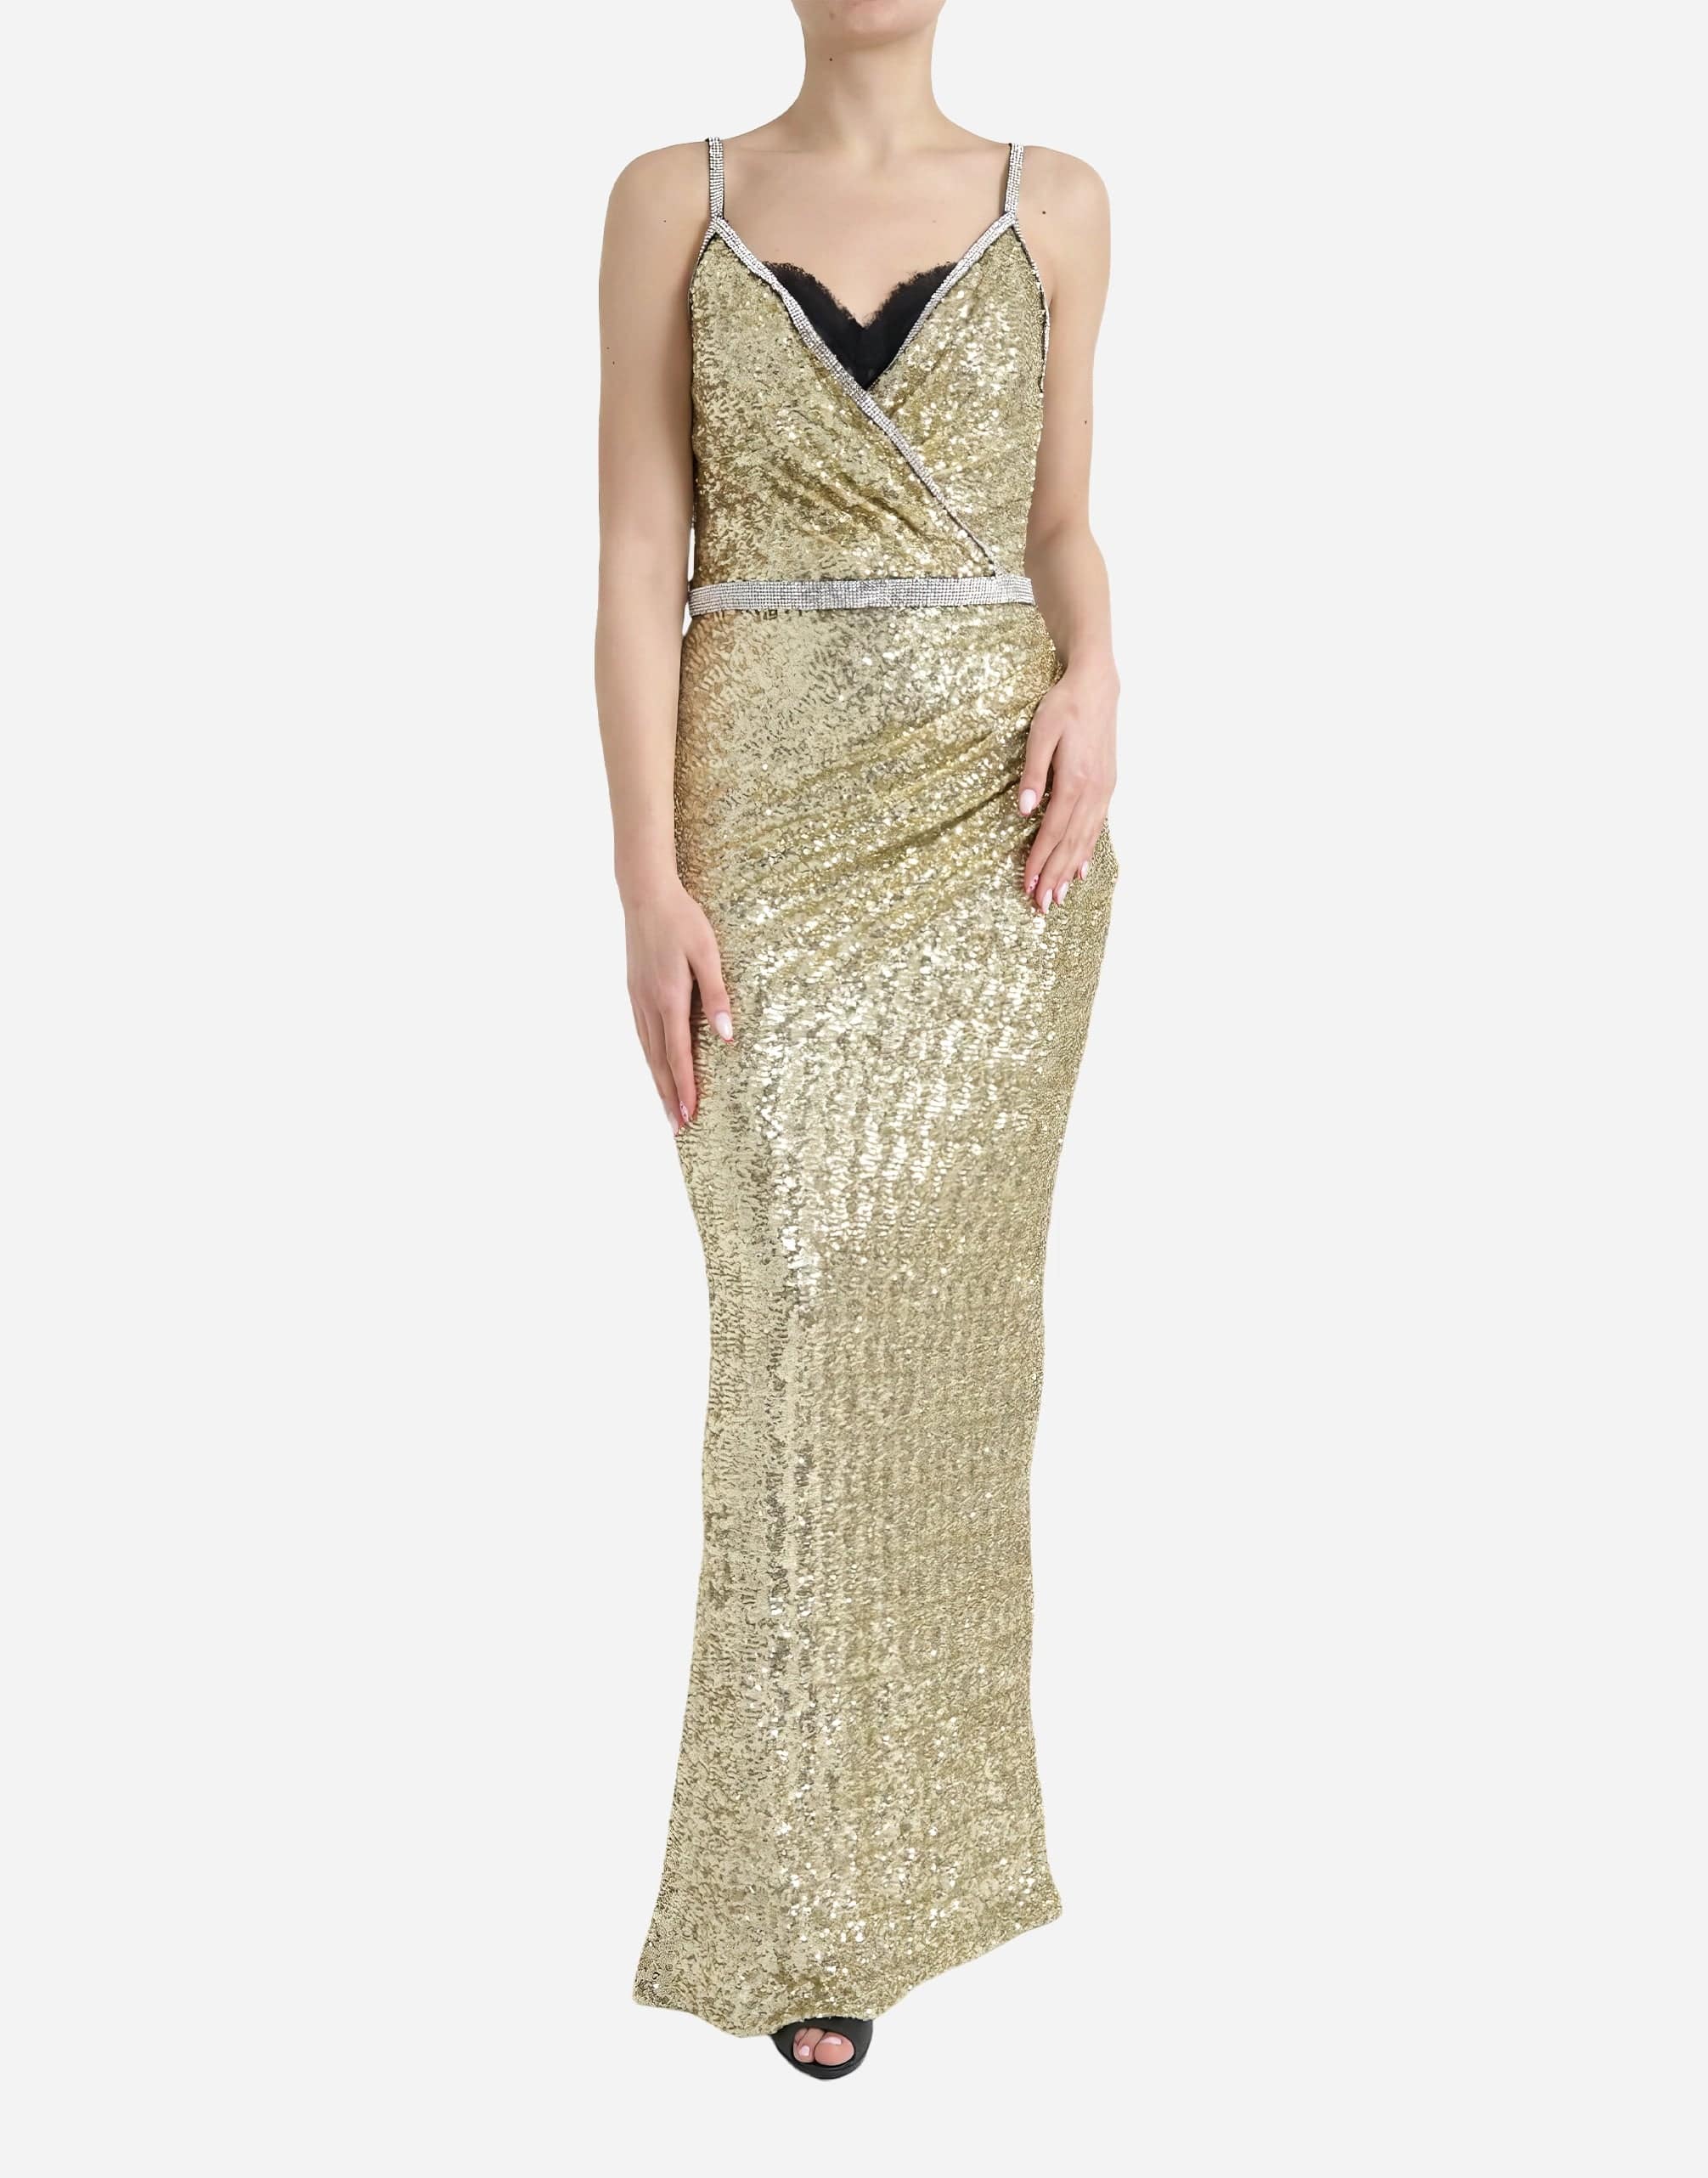 Crystal Embellished Sequined Stretch Satin Gown